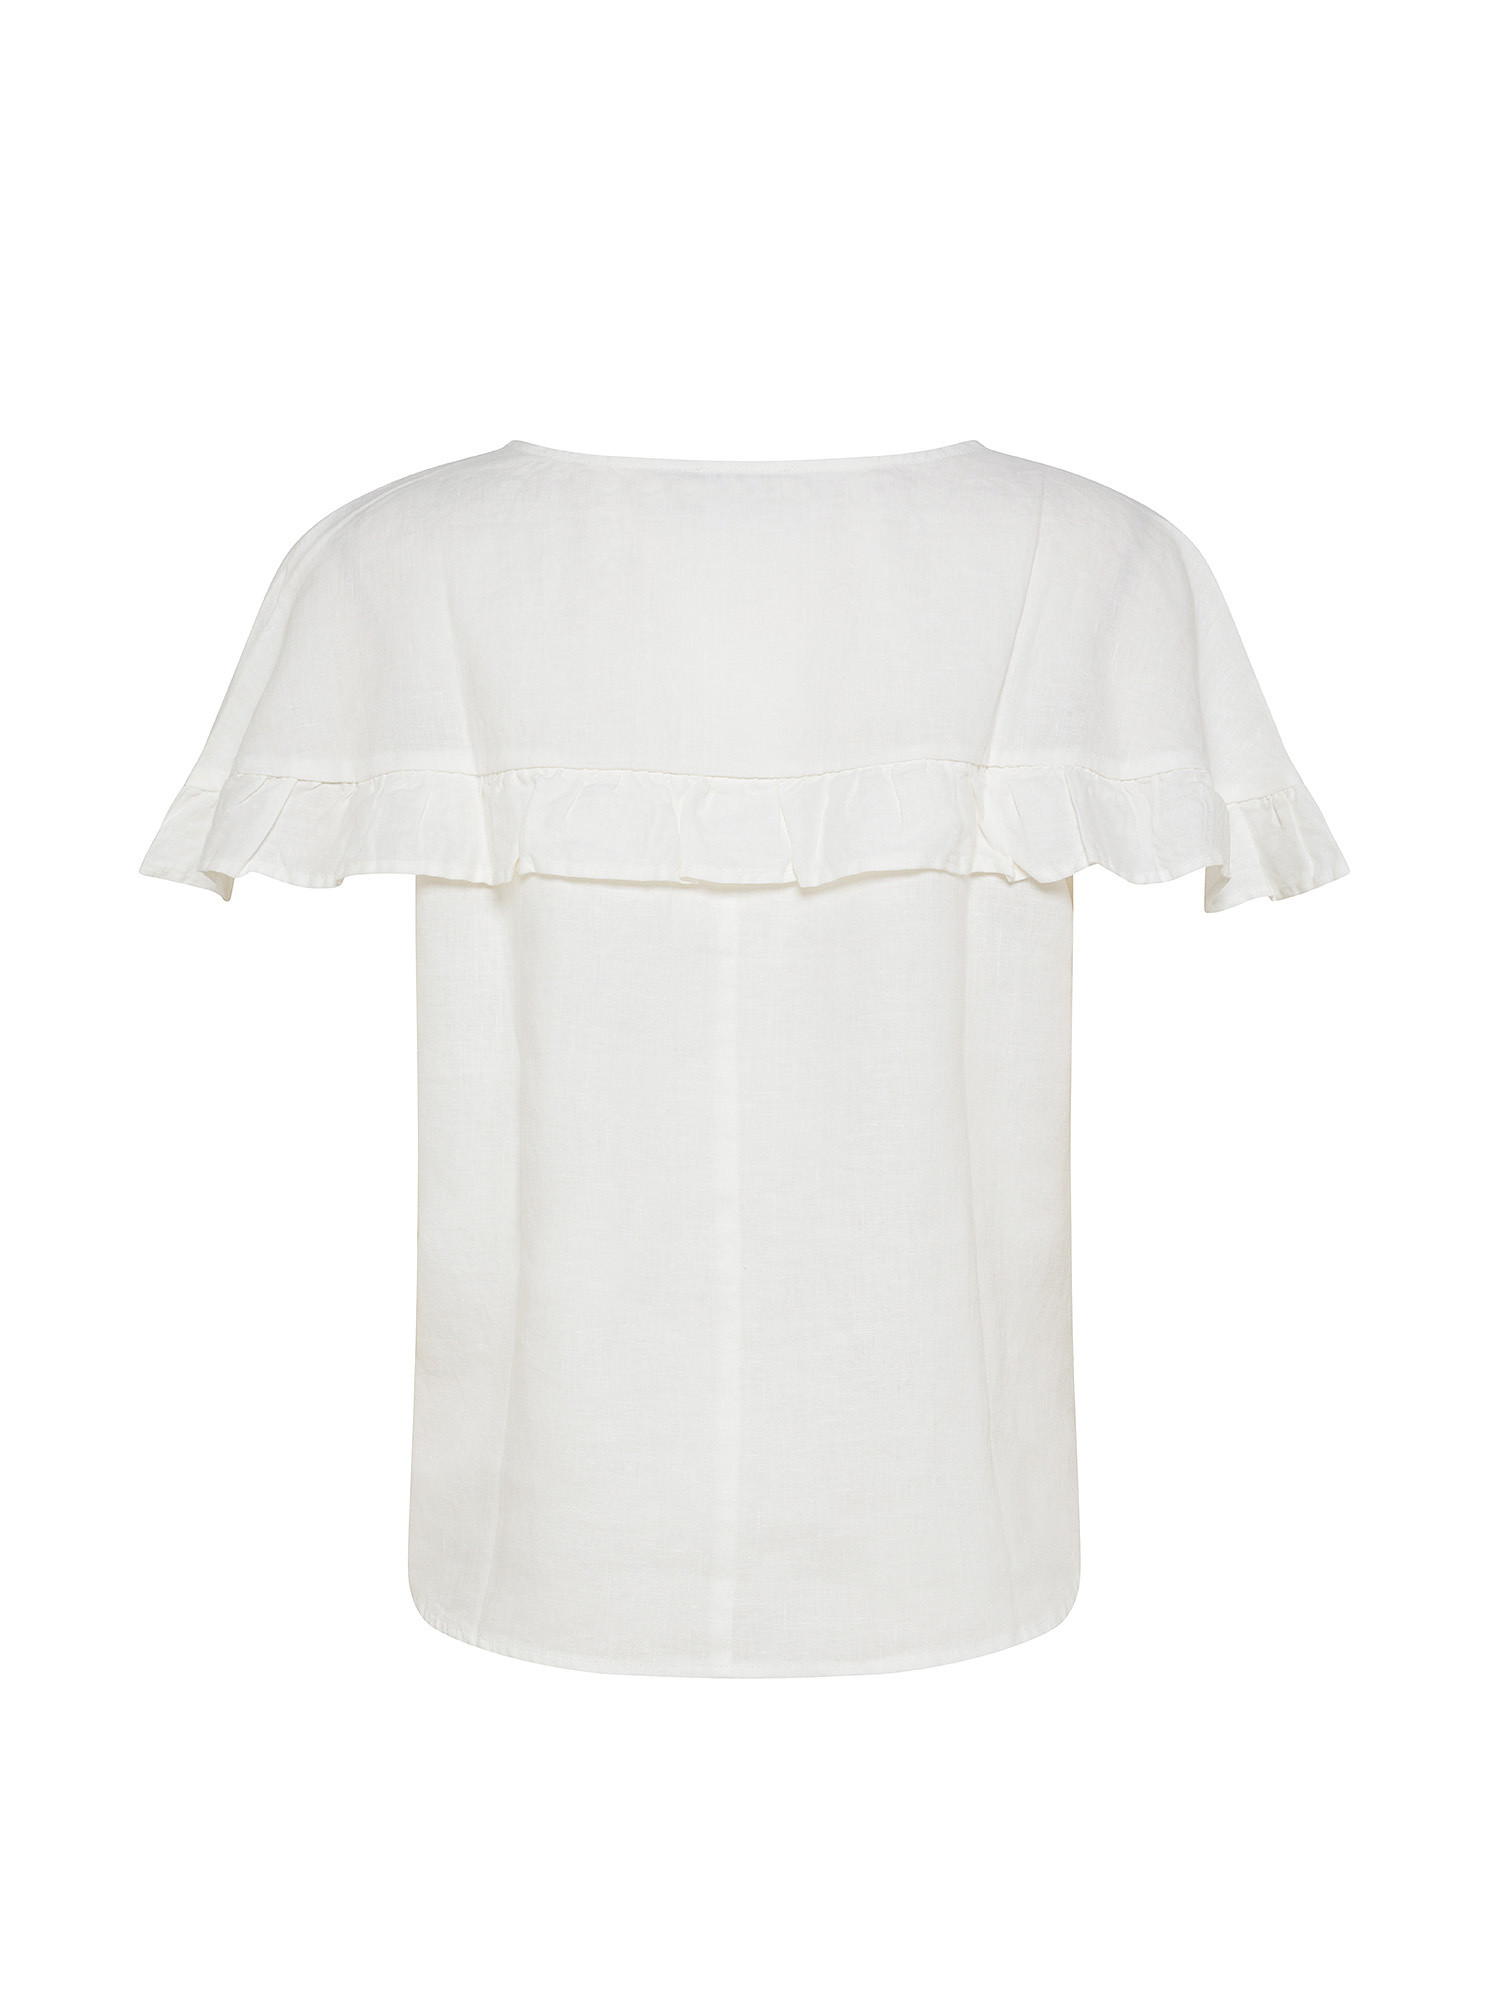 Koan - Blusa in lino con volant, Bianco, large image number 1